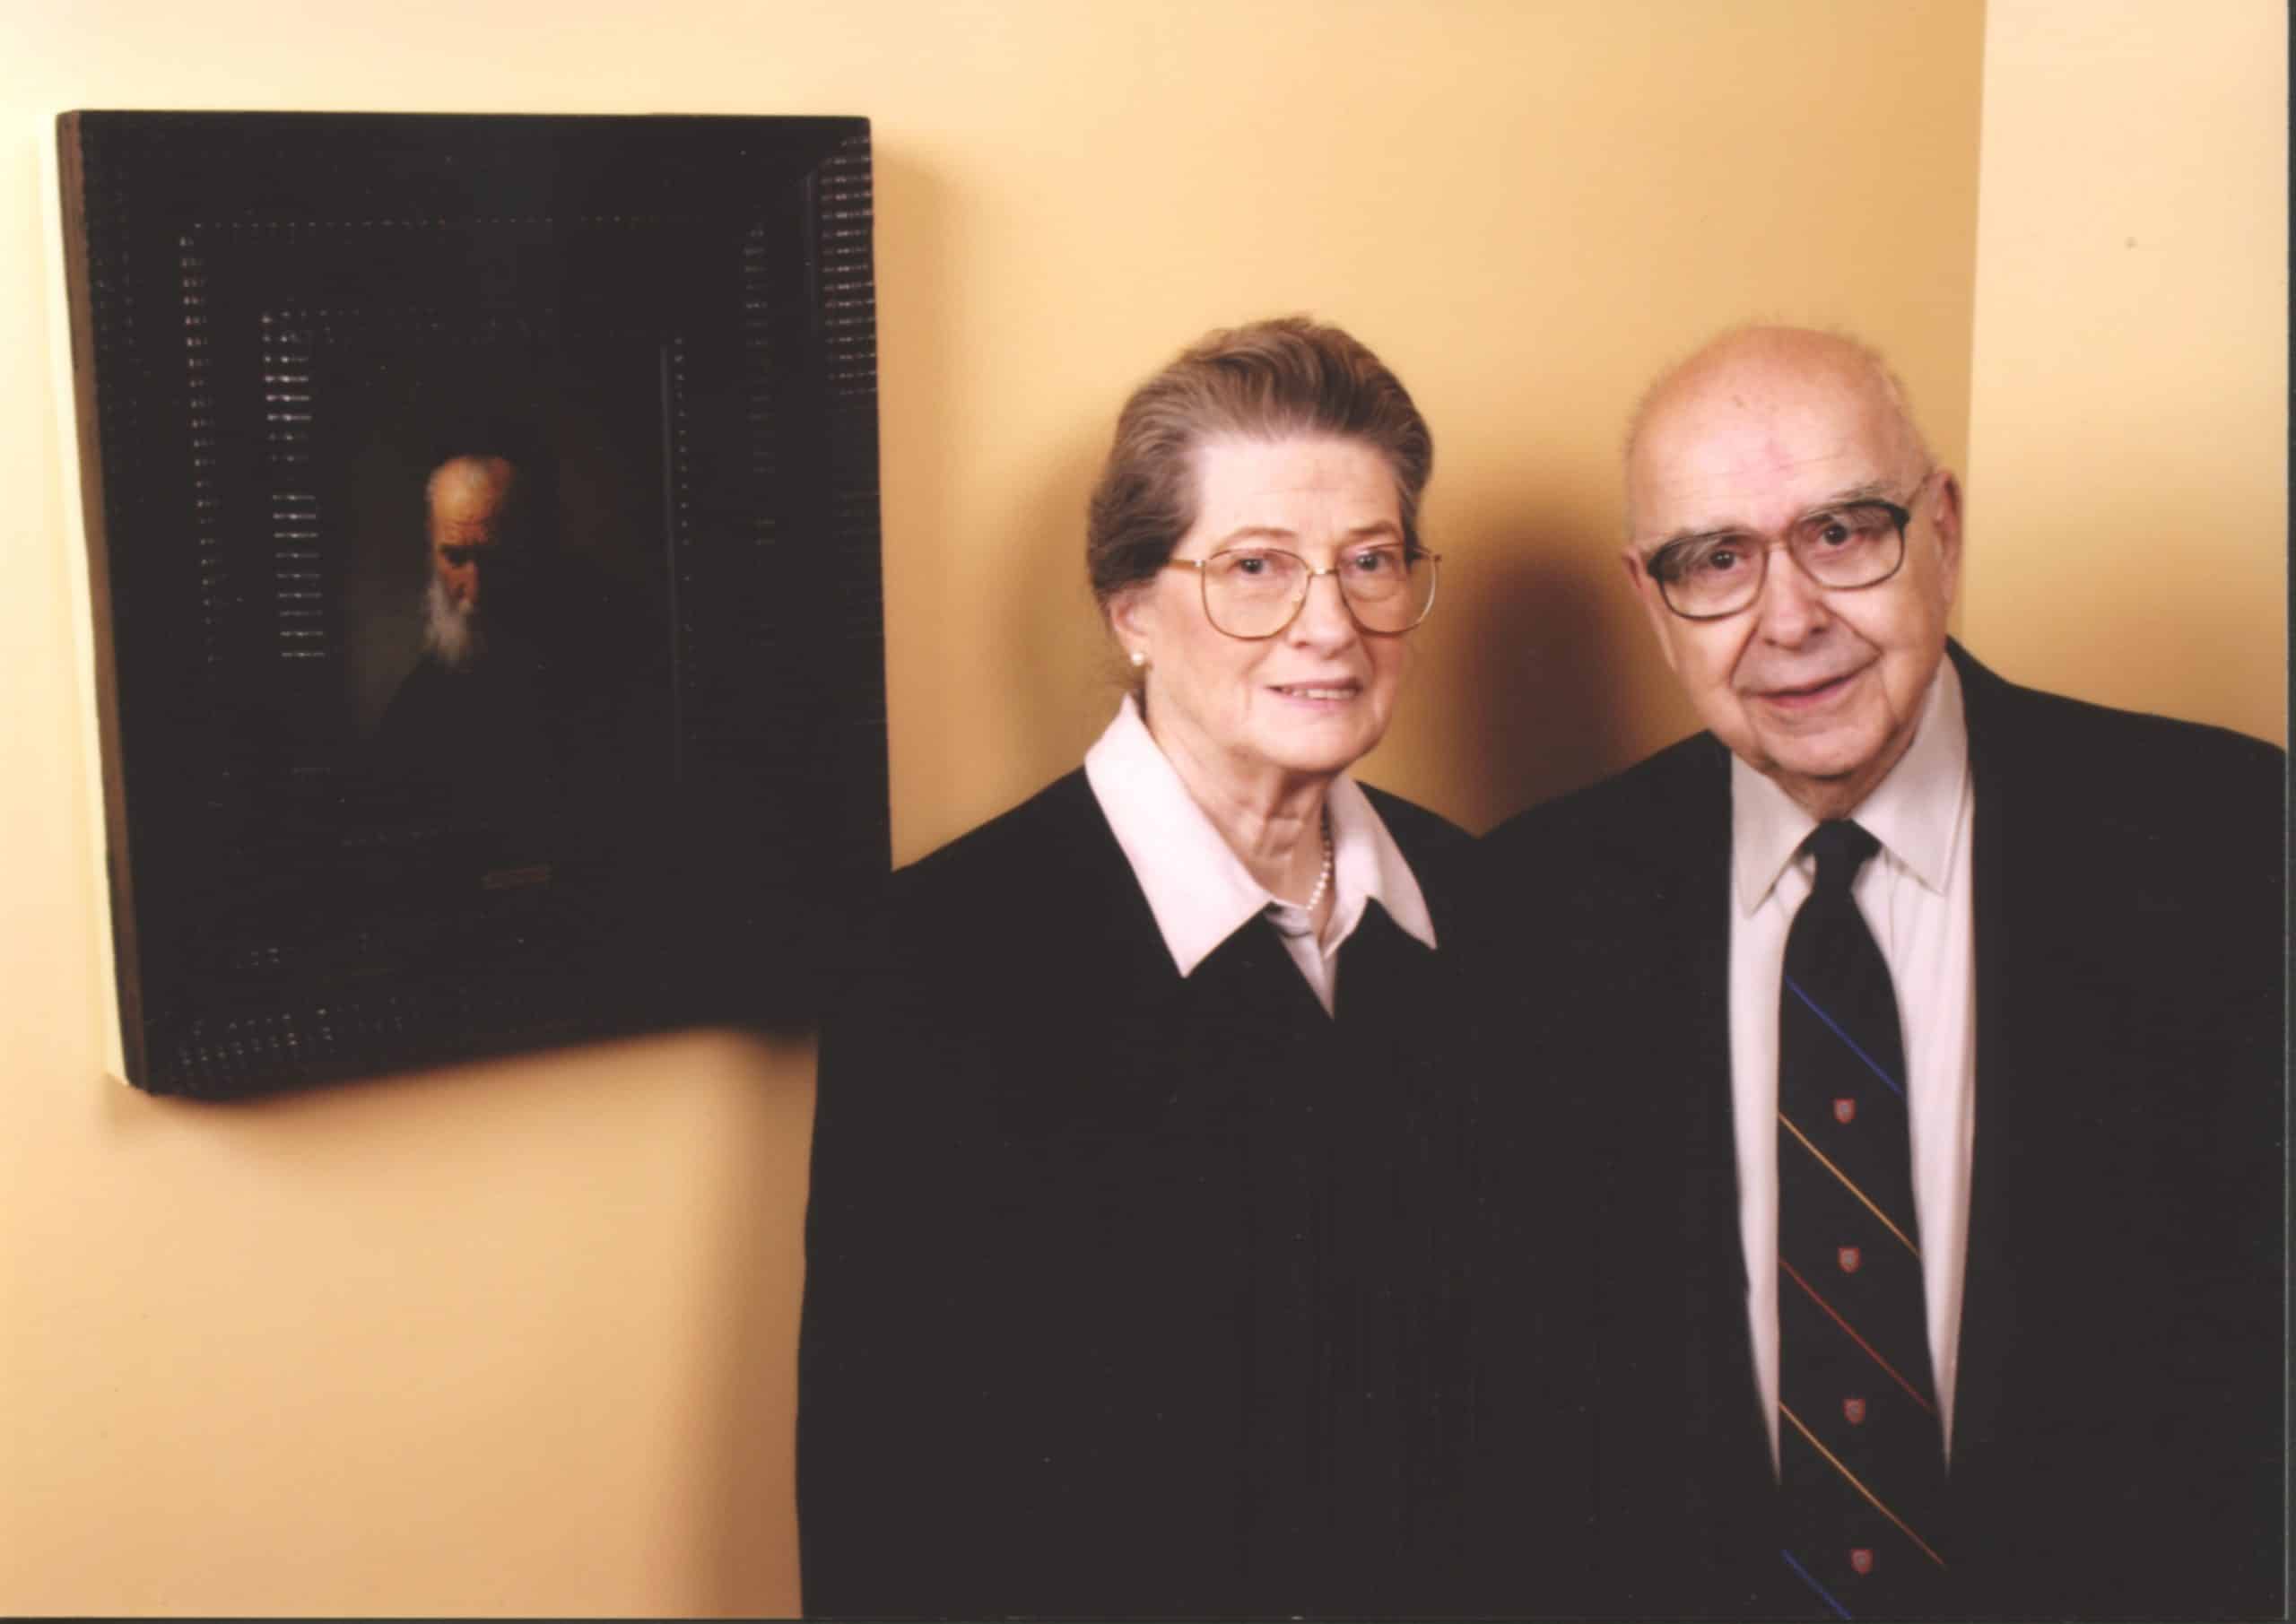 An elderly man and woman wearing glasses and dark clothing stand next to a painting of an old man in a black frame.